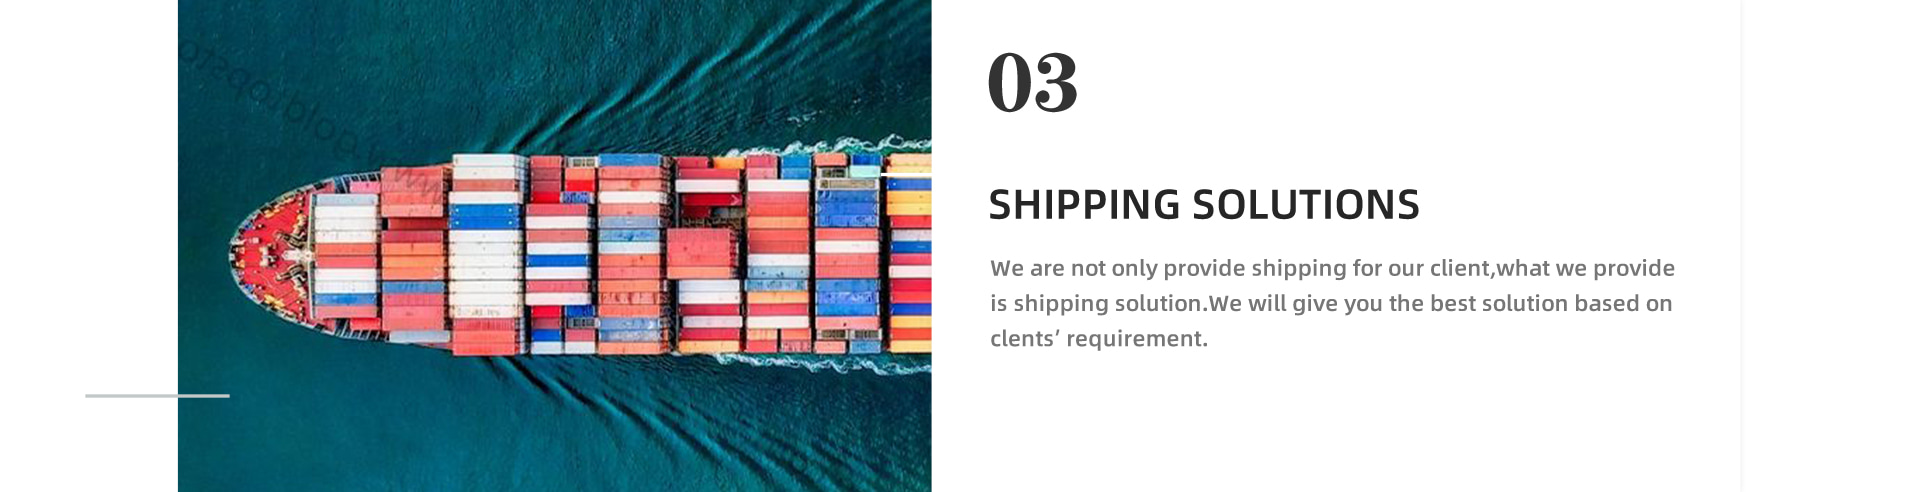 SHIPPING SOLUTIONS We are not only provide shipping for our client,what we provide is shipping solution.We will give you the best solution based on clents’ requirement.